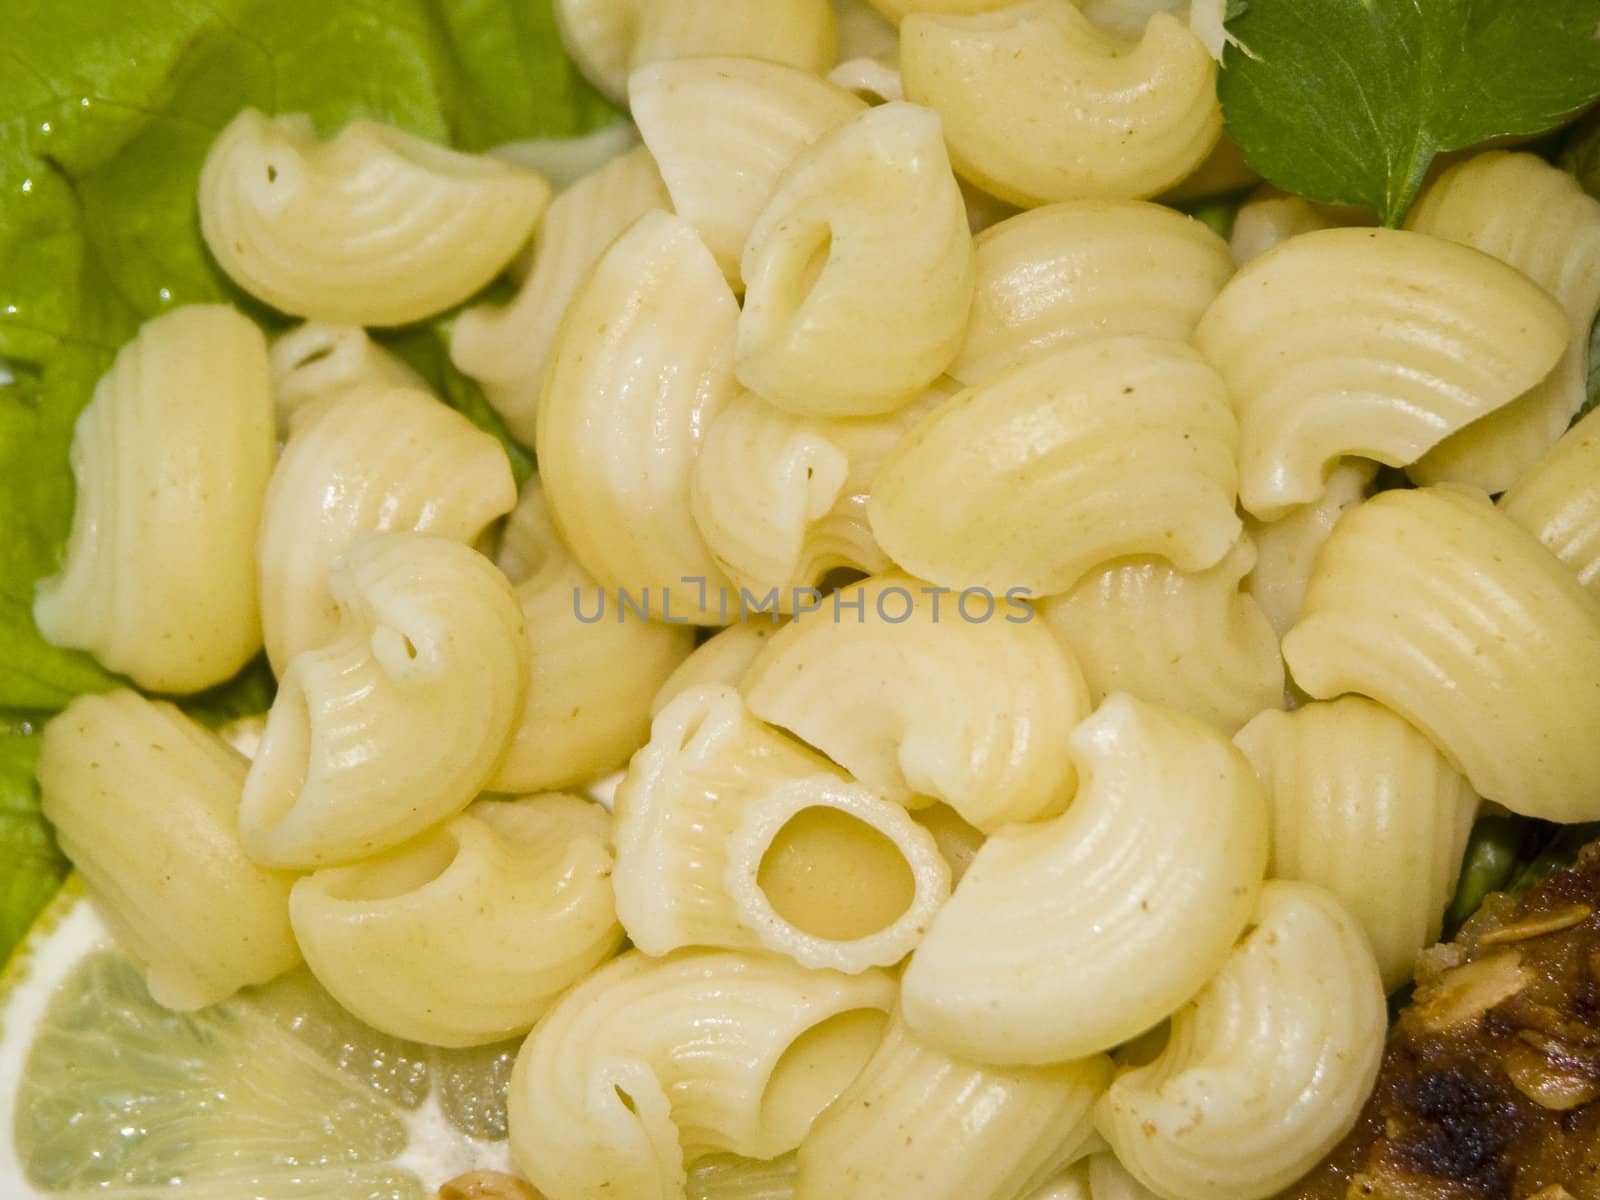  The image of macaroni on a plate close up